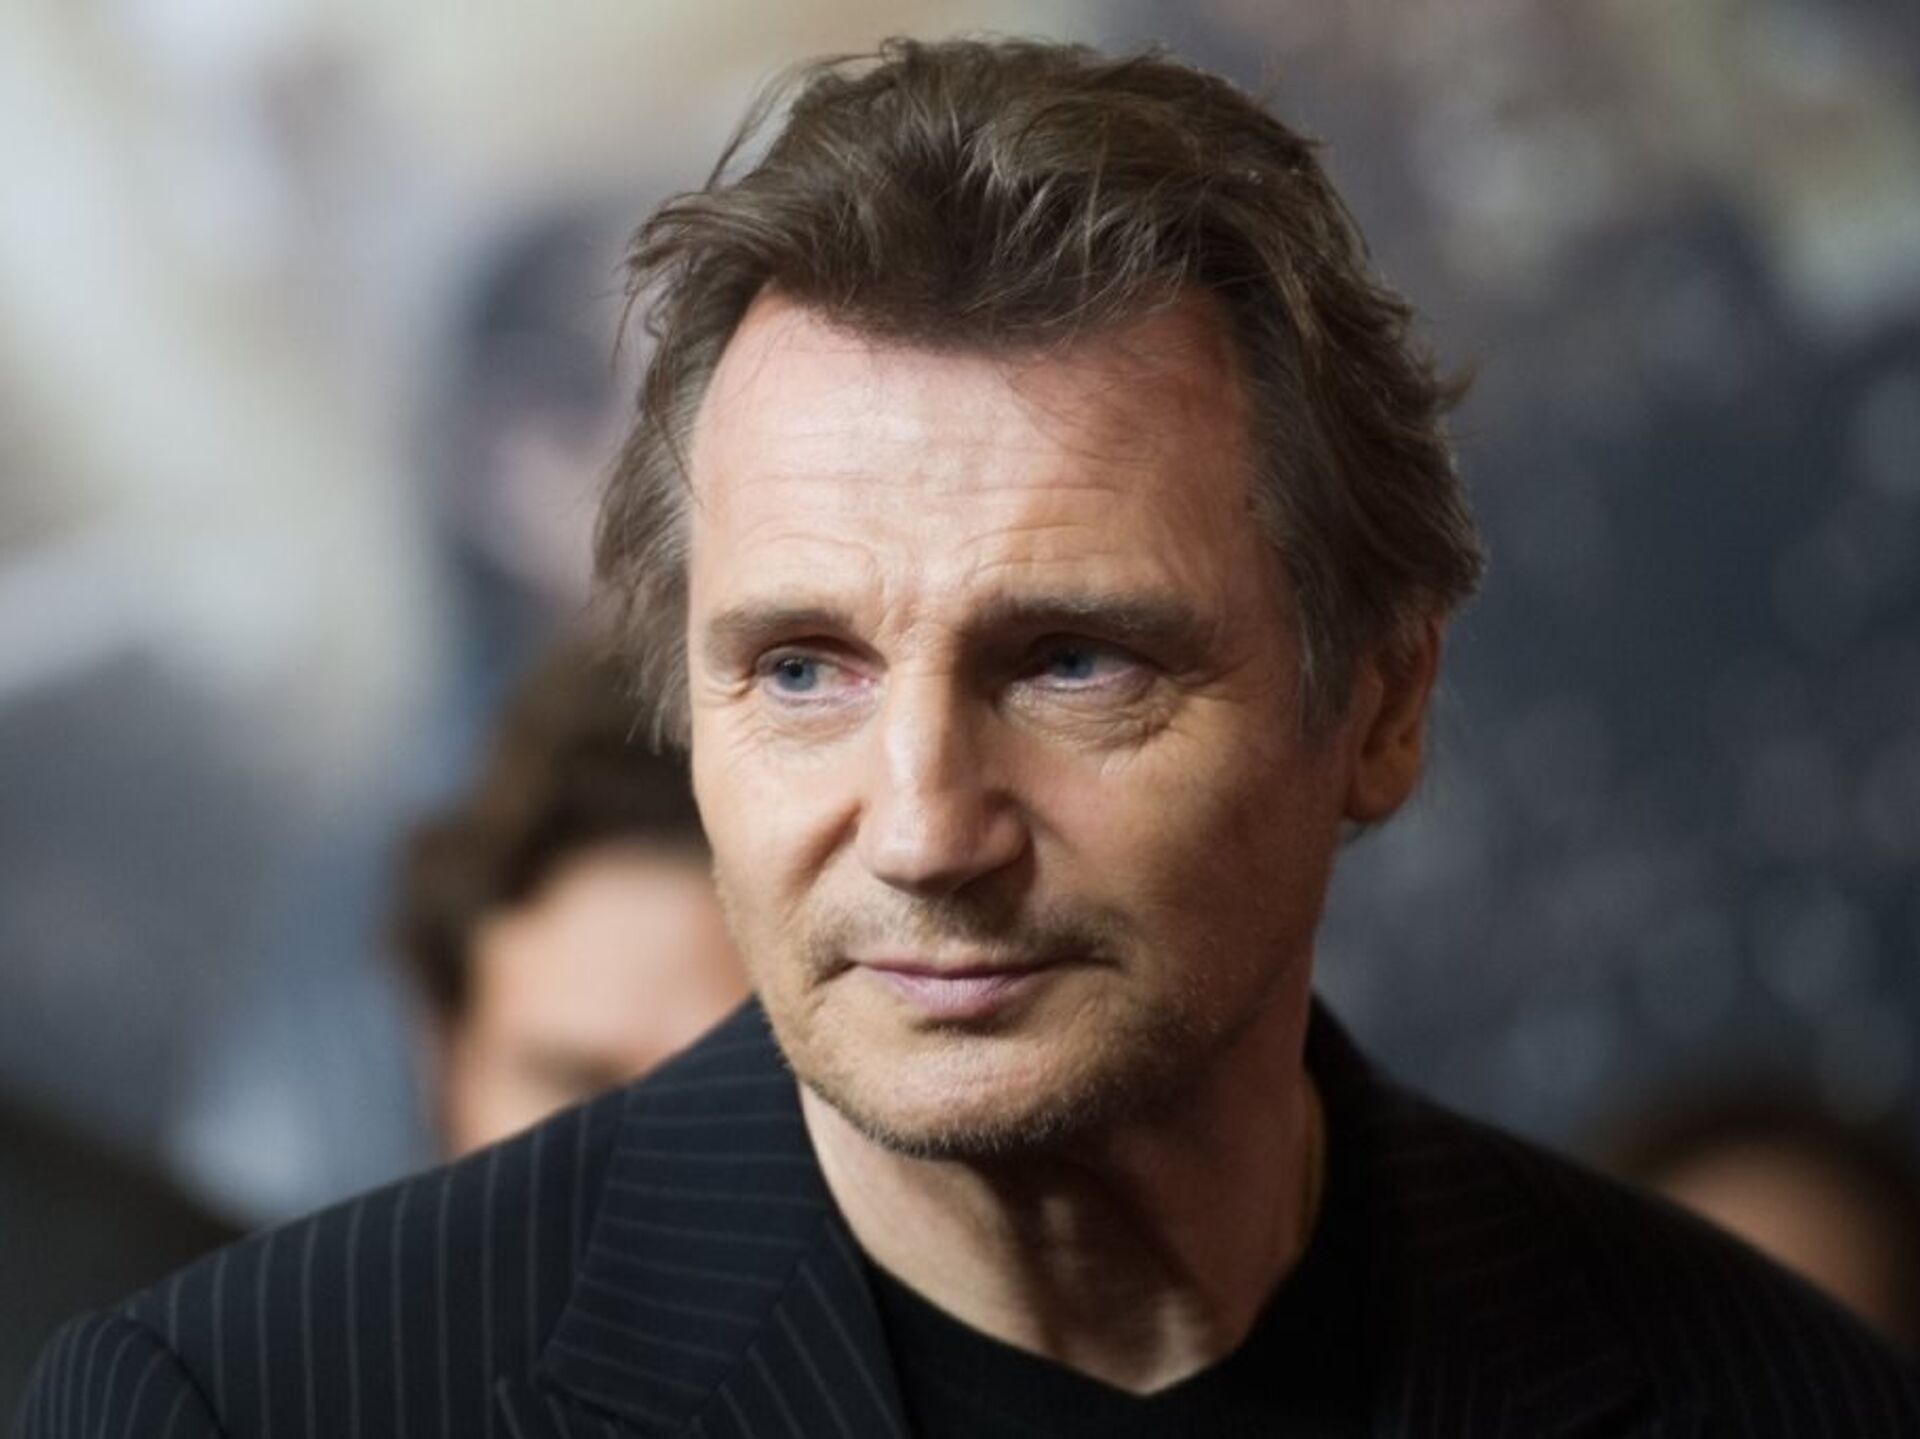 He won hearts with Schindler's List: Who is Liam Neeson?